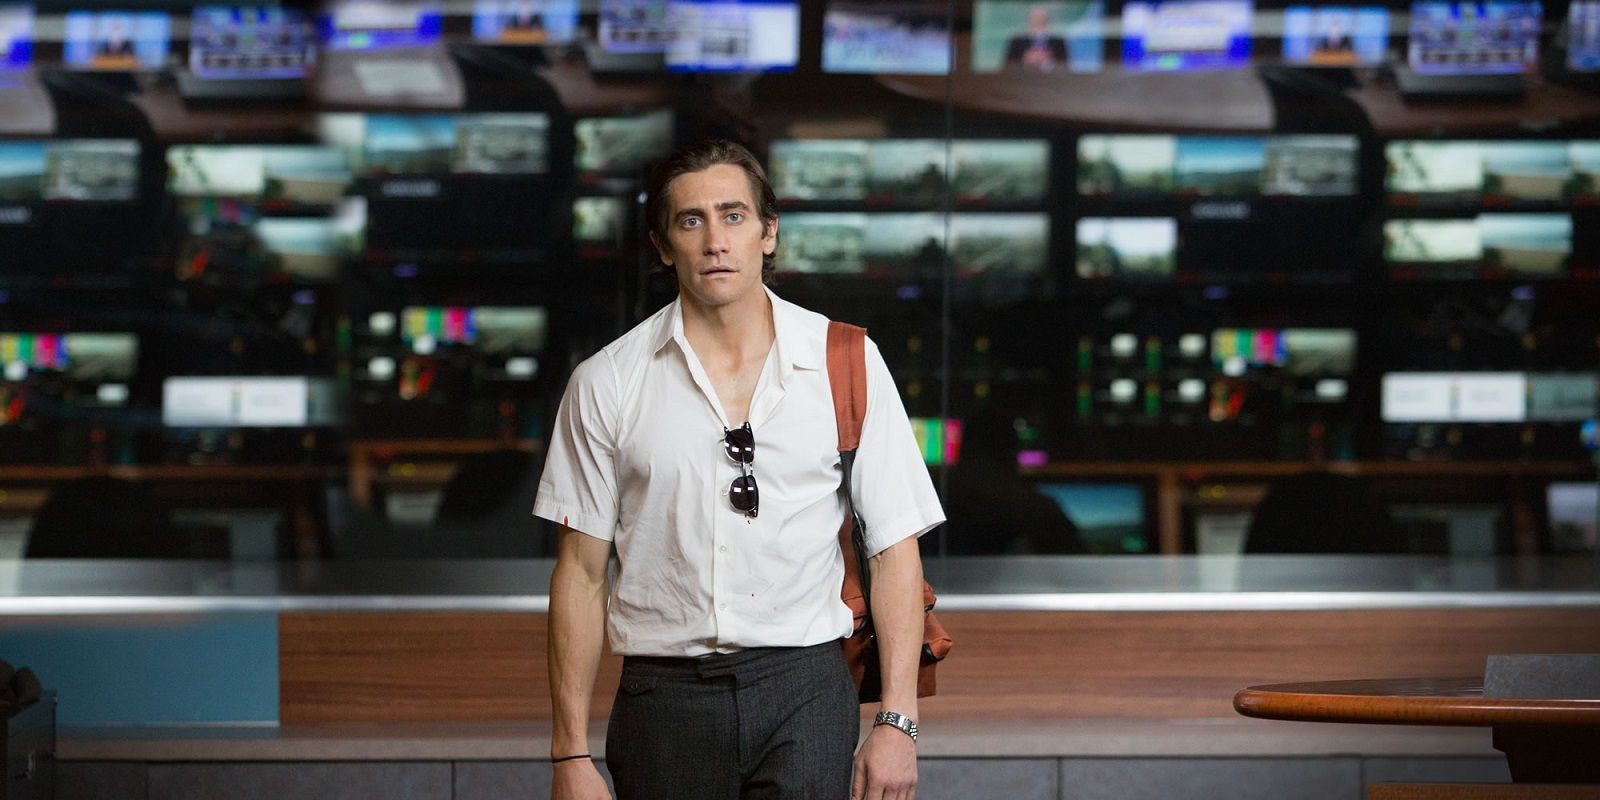 Louis at the news station in Nightcrawler